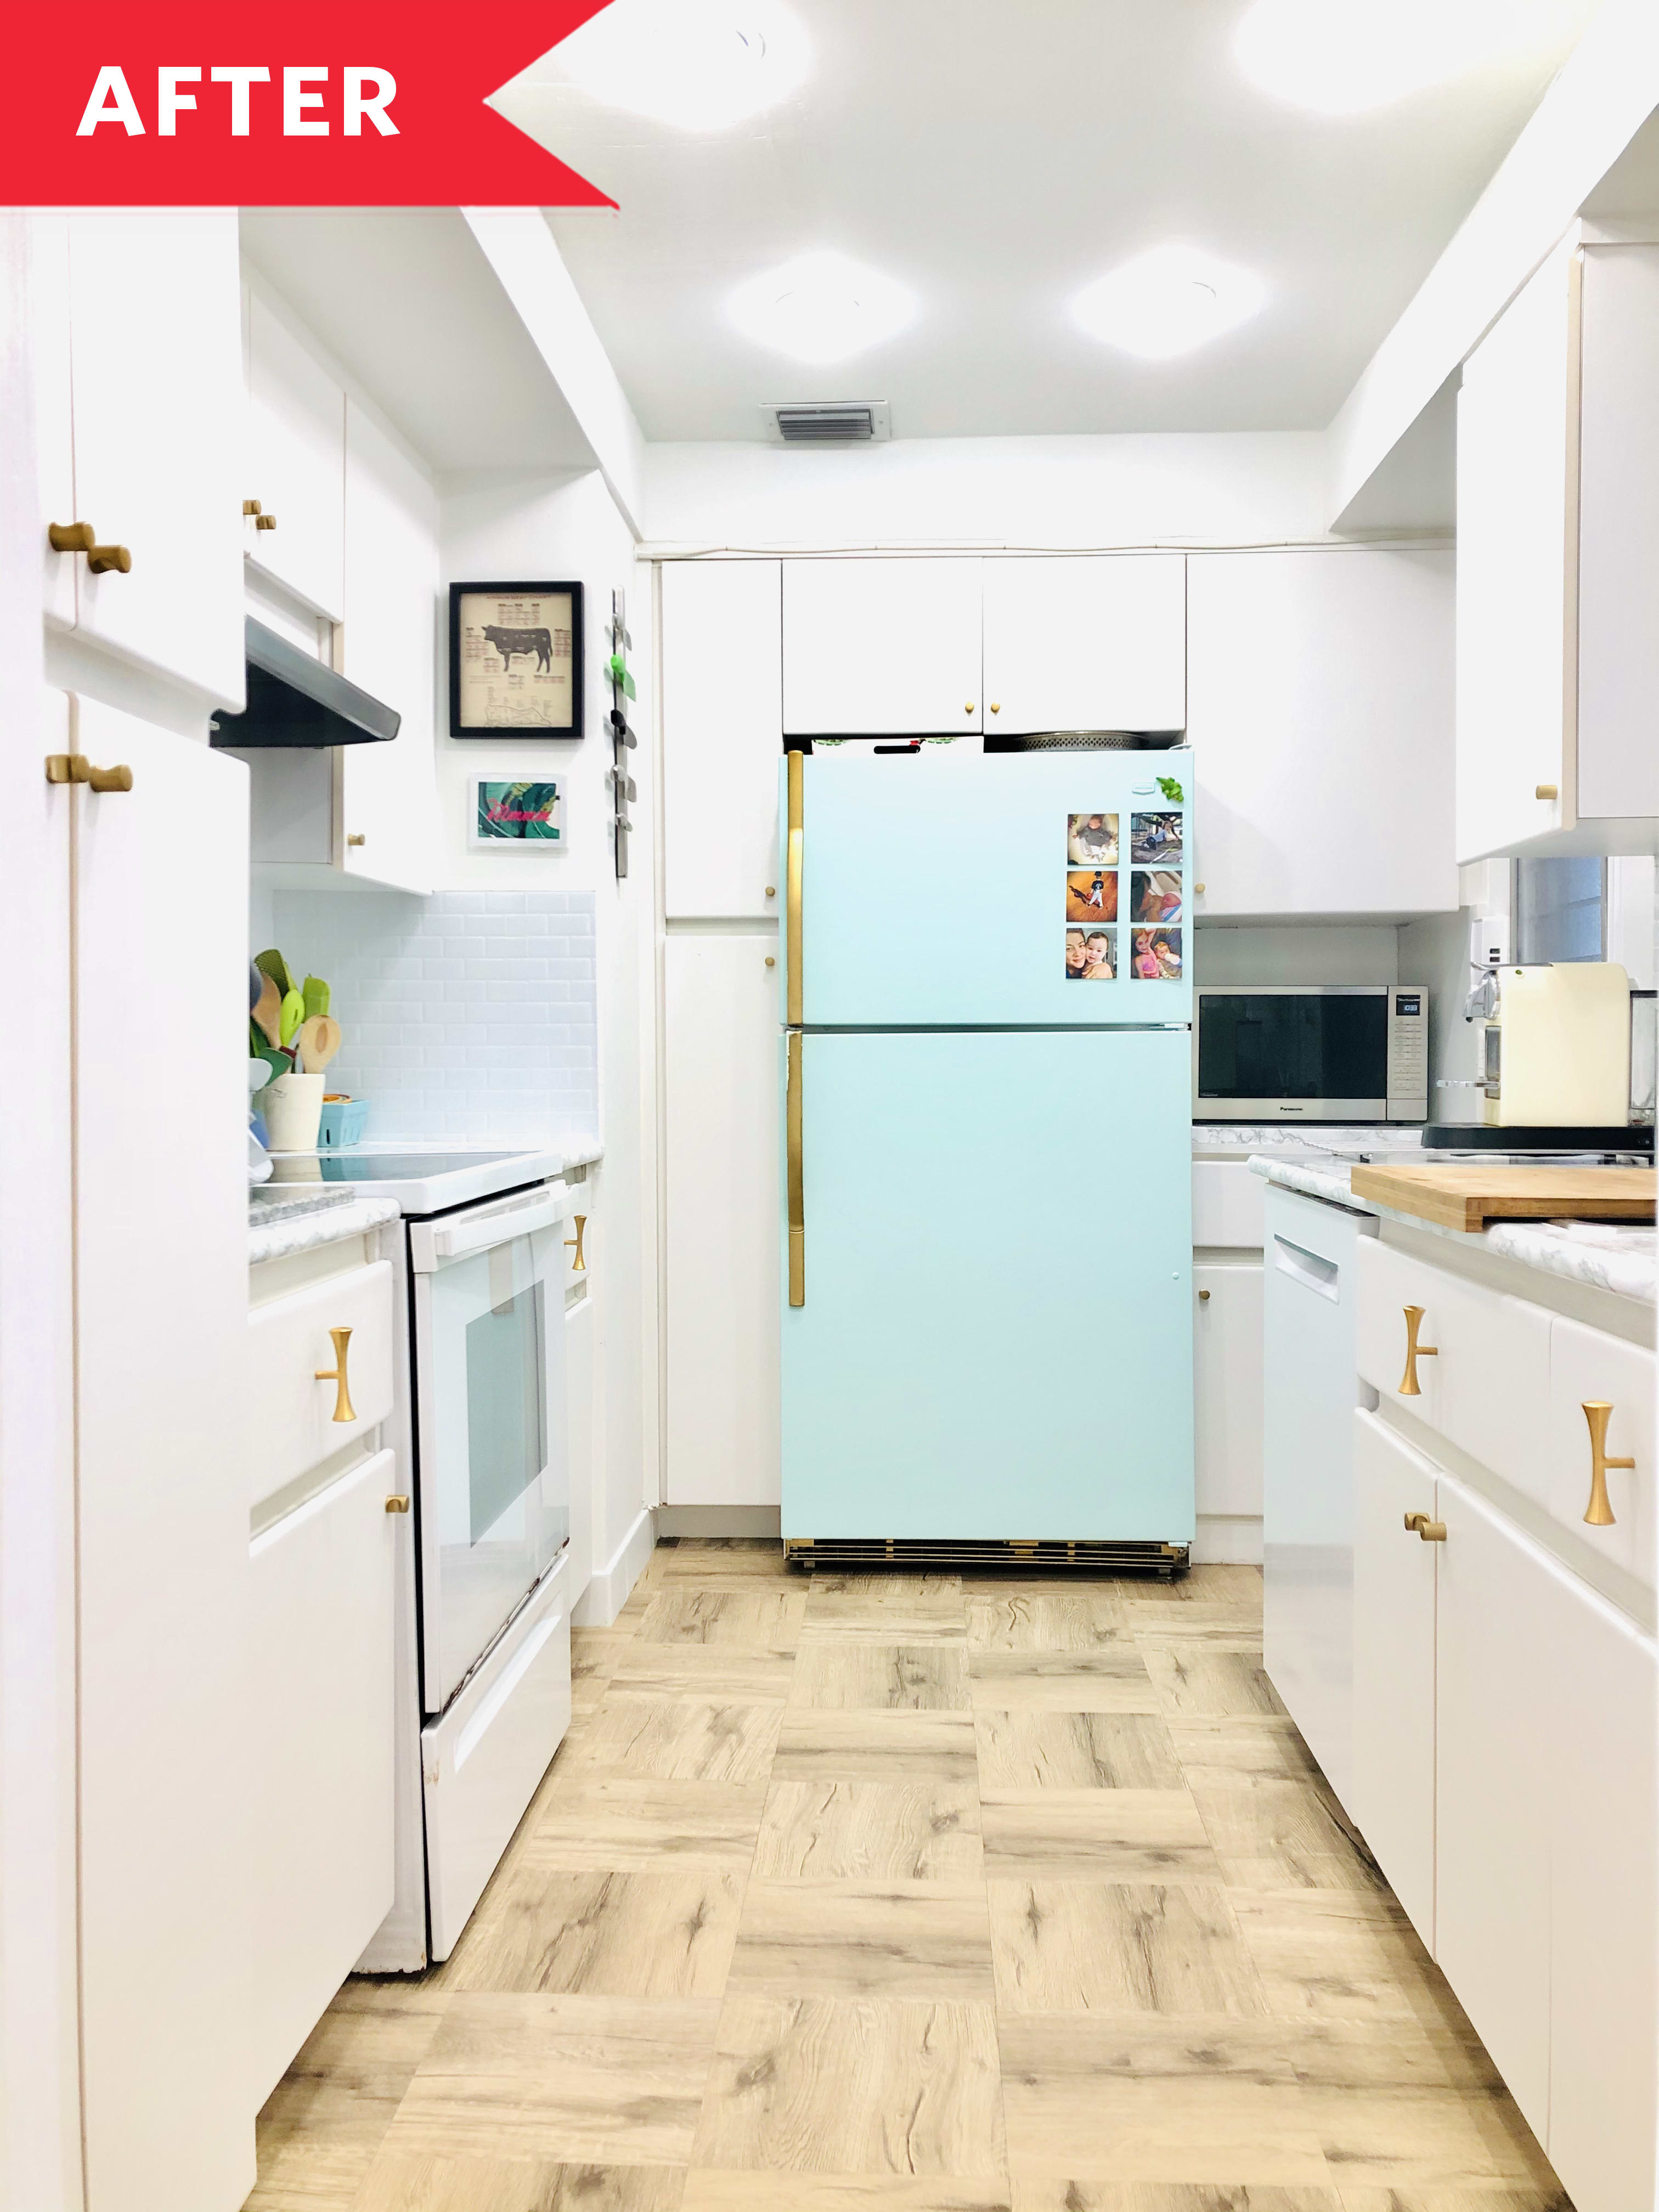 After: Kitchen with white cabinets and light blue fridge